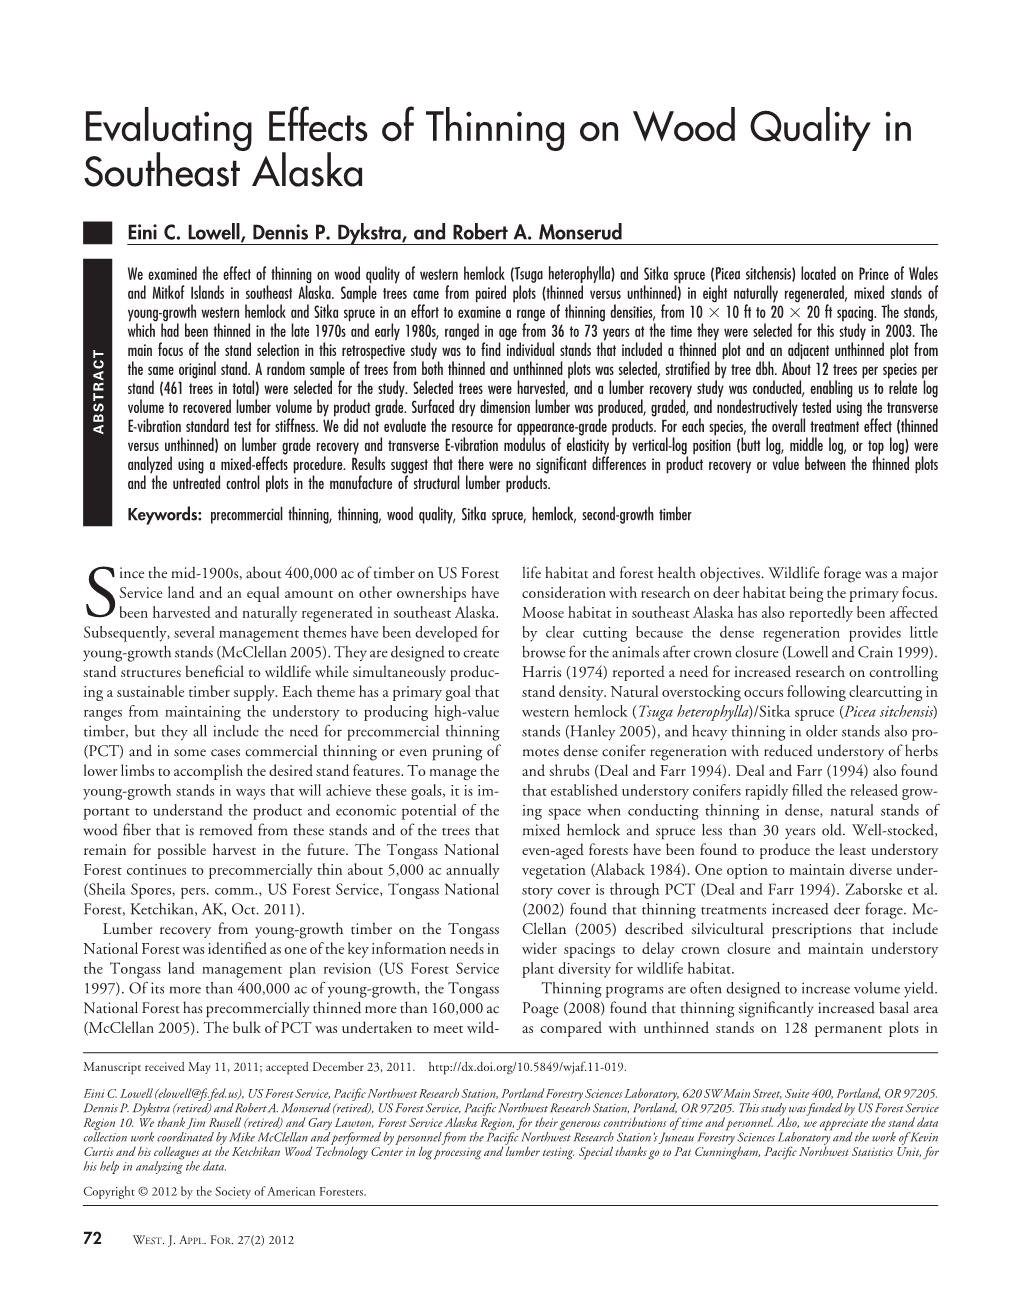 Evaluating Effects of Thinning on Wood Quality in Southeast Alaska